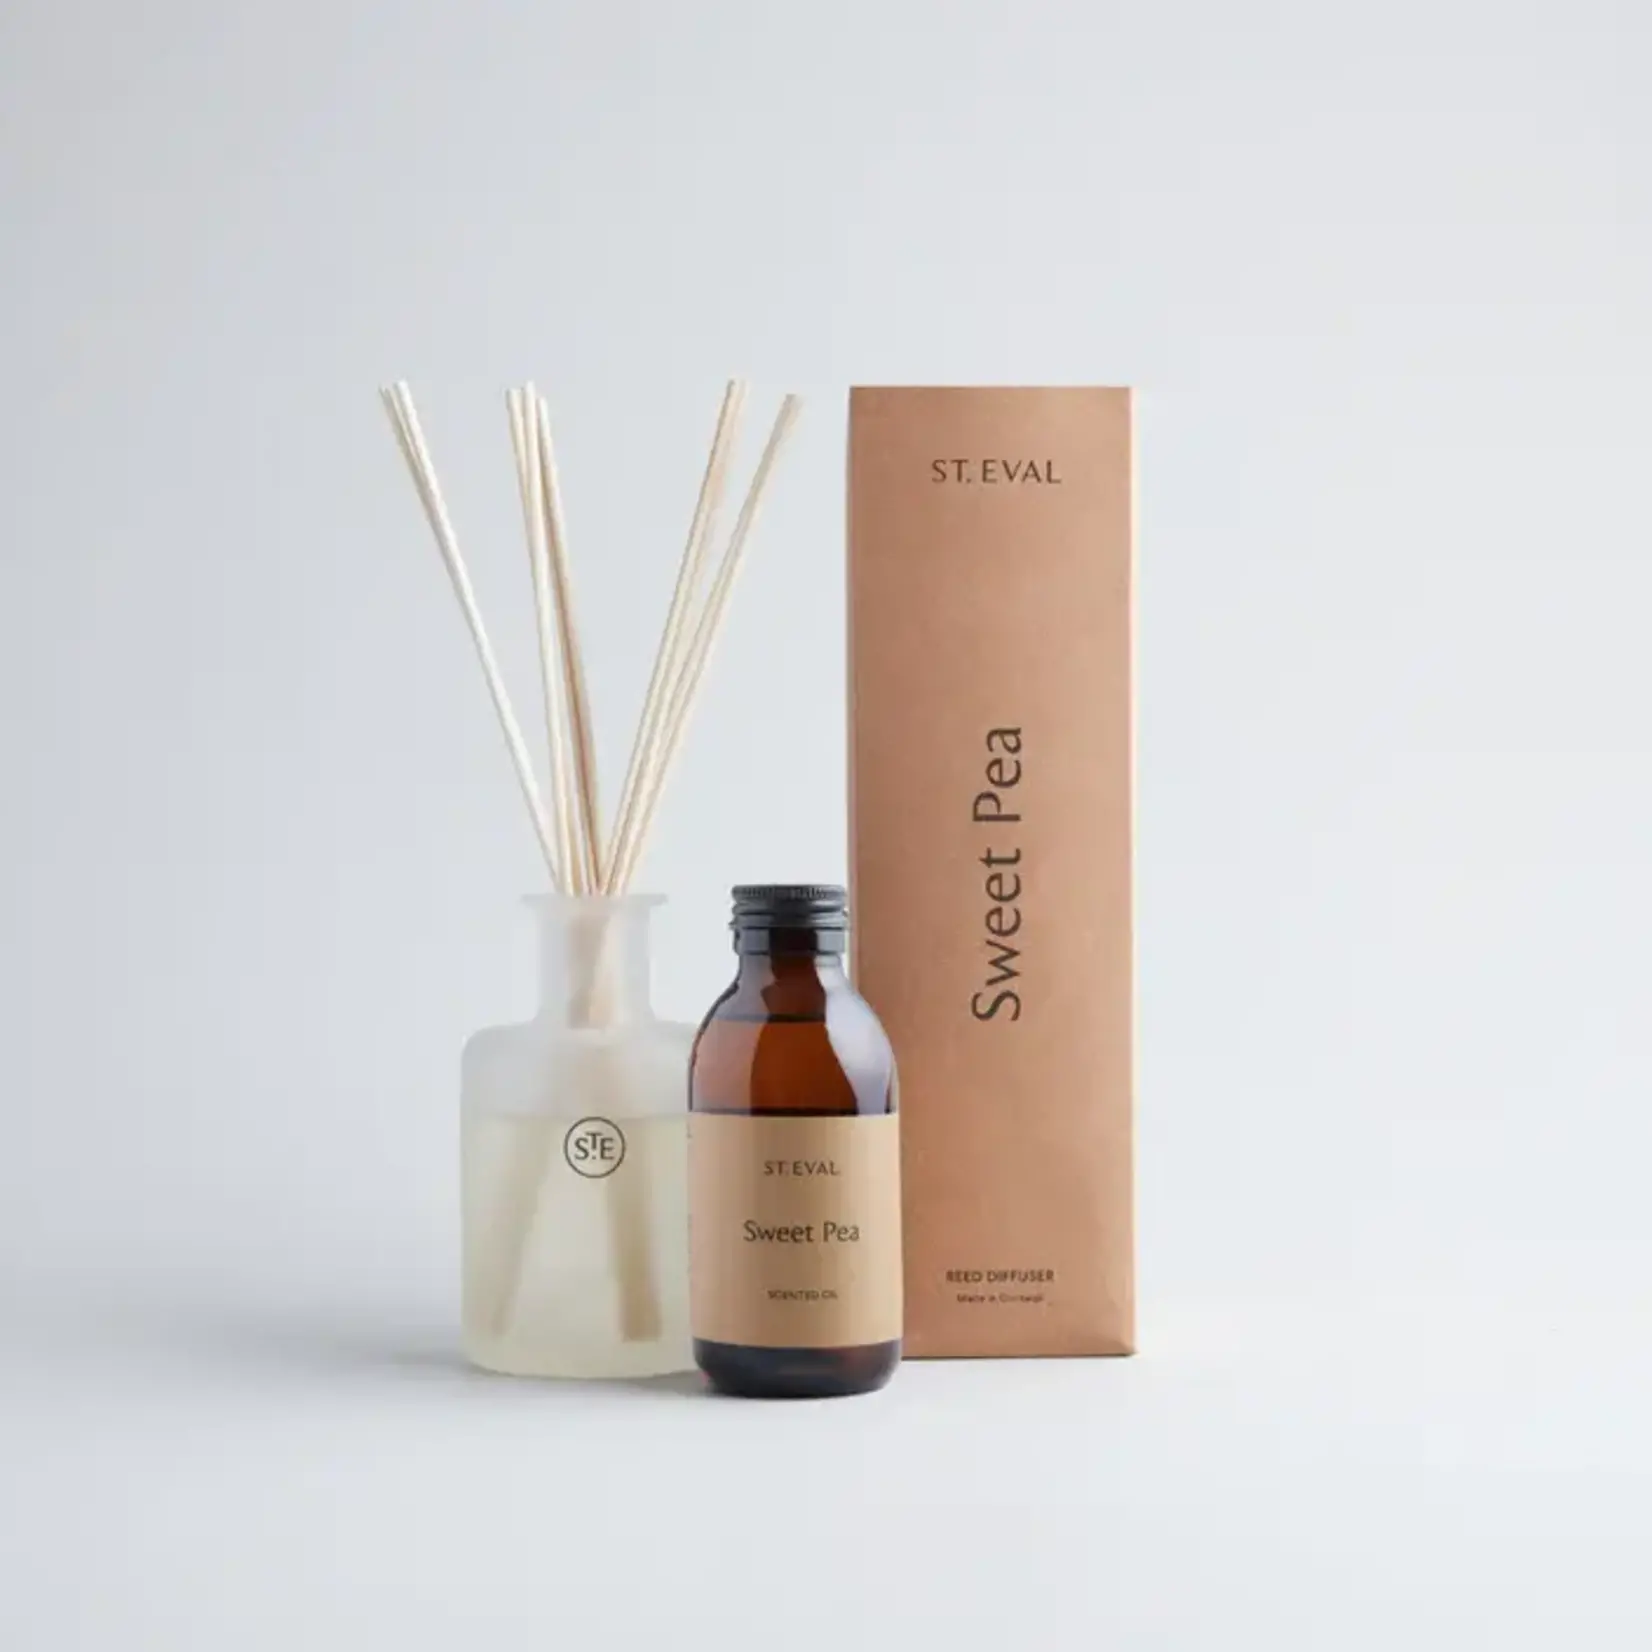 St. Eval St Eval Sweet Pea Reed Diffuser